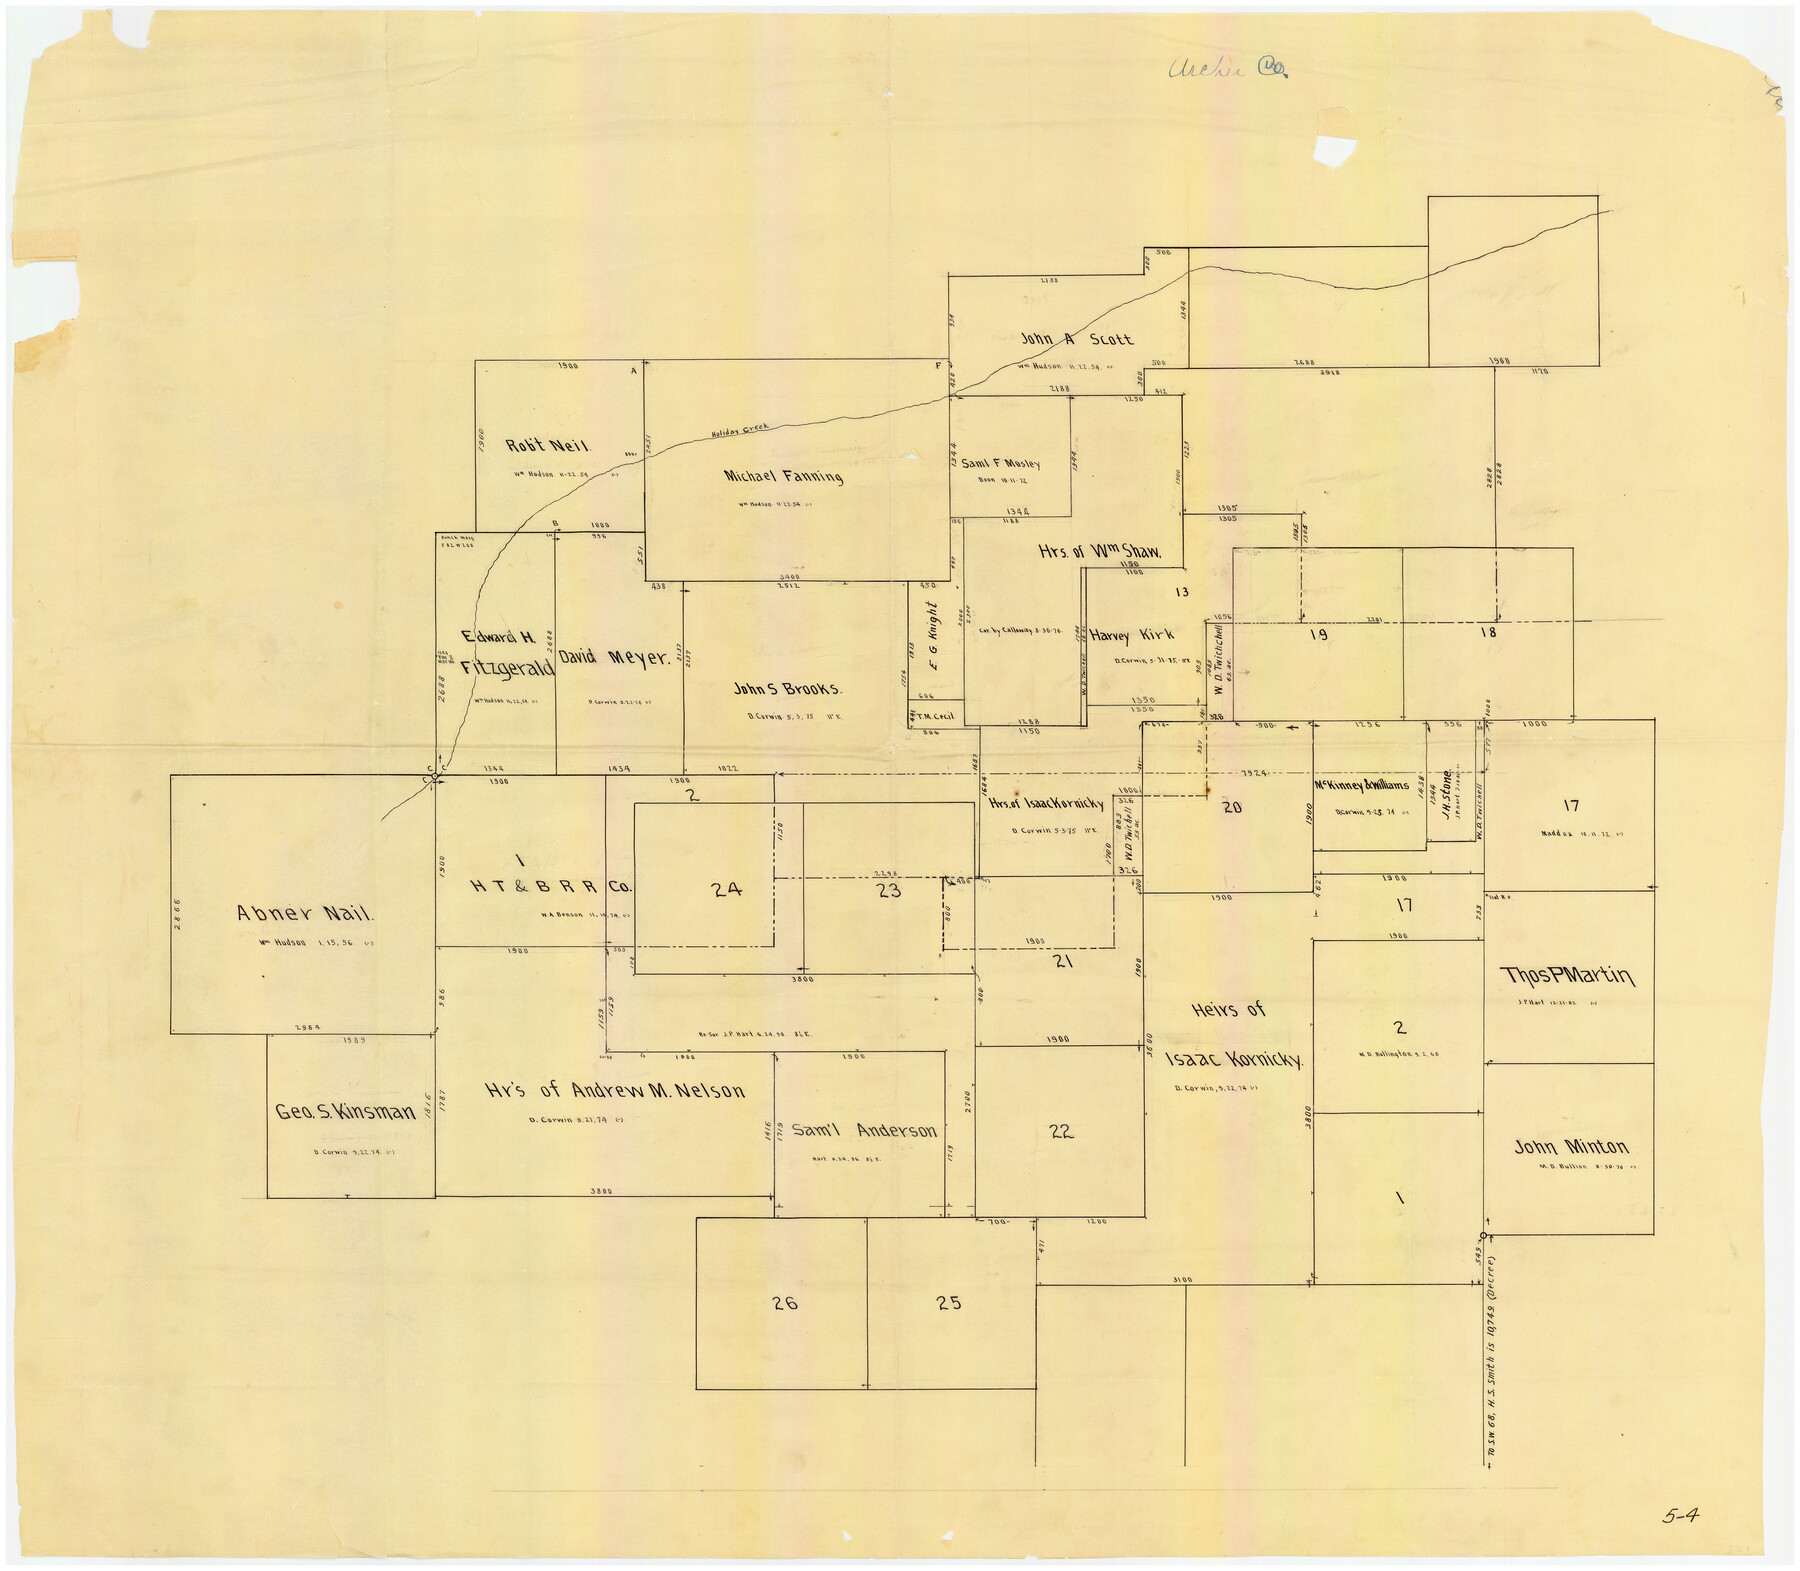 90164, [Sketch showing various surveys south and along Holiday Creek], Twichell Survey Records